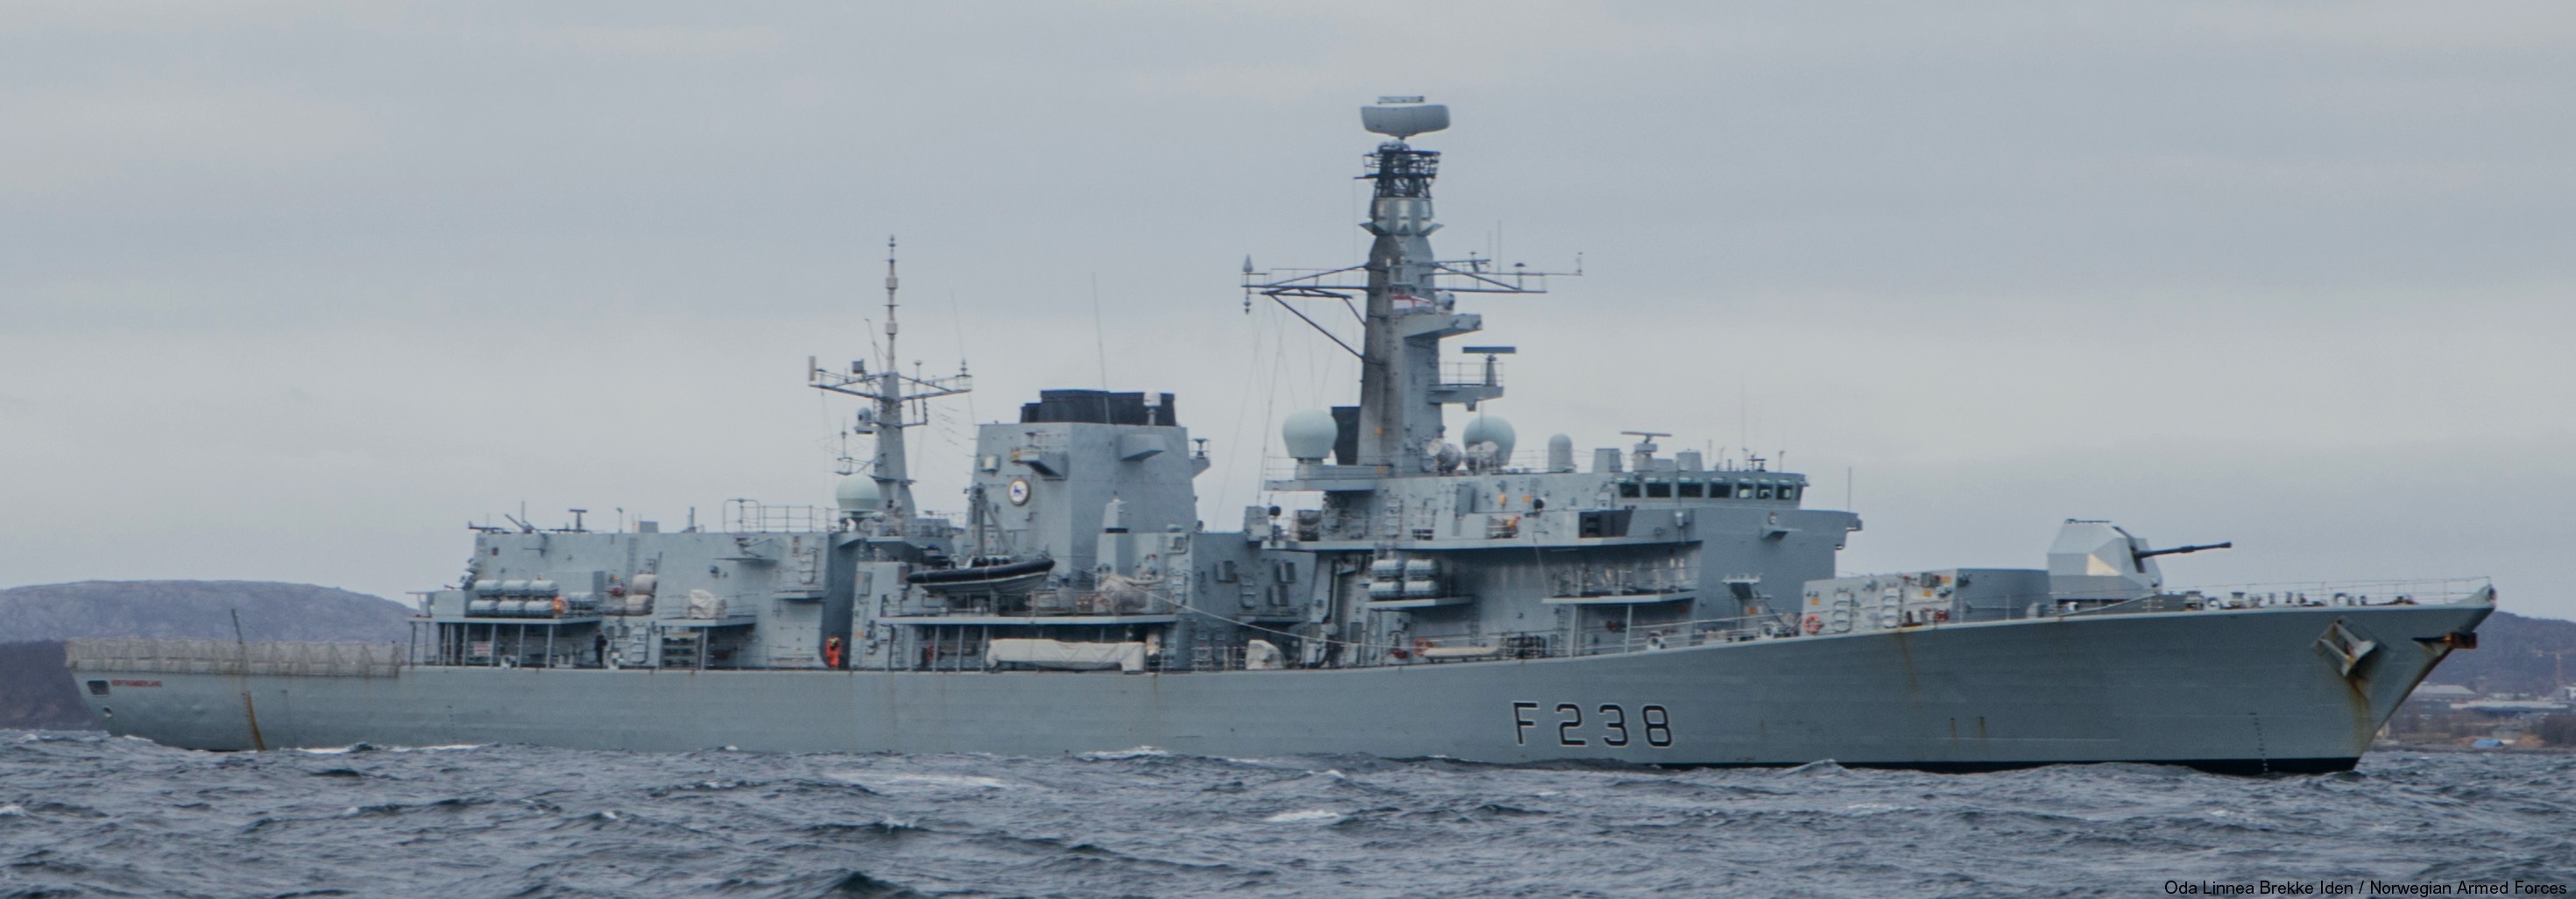 f-238 hms northumberland type 23 duke class guided missile frigate royal navy 12